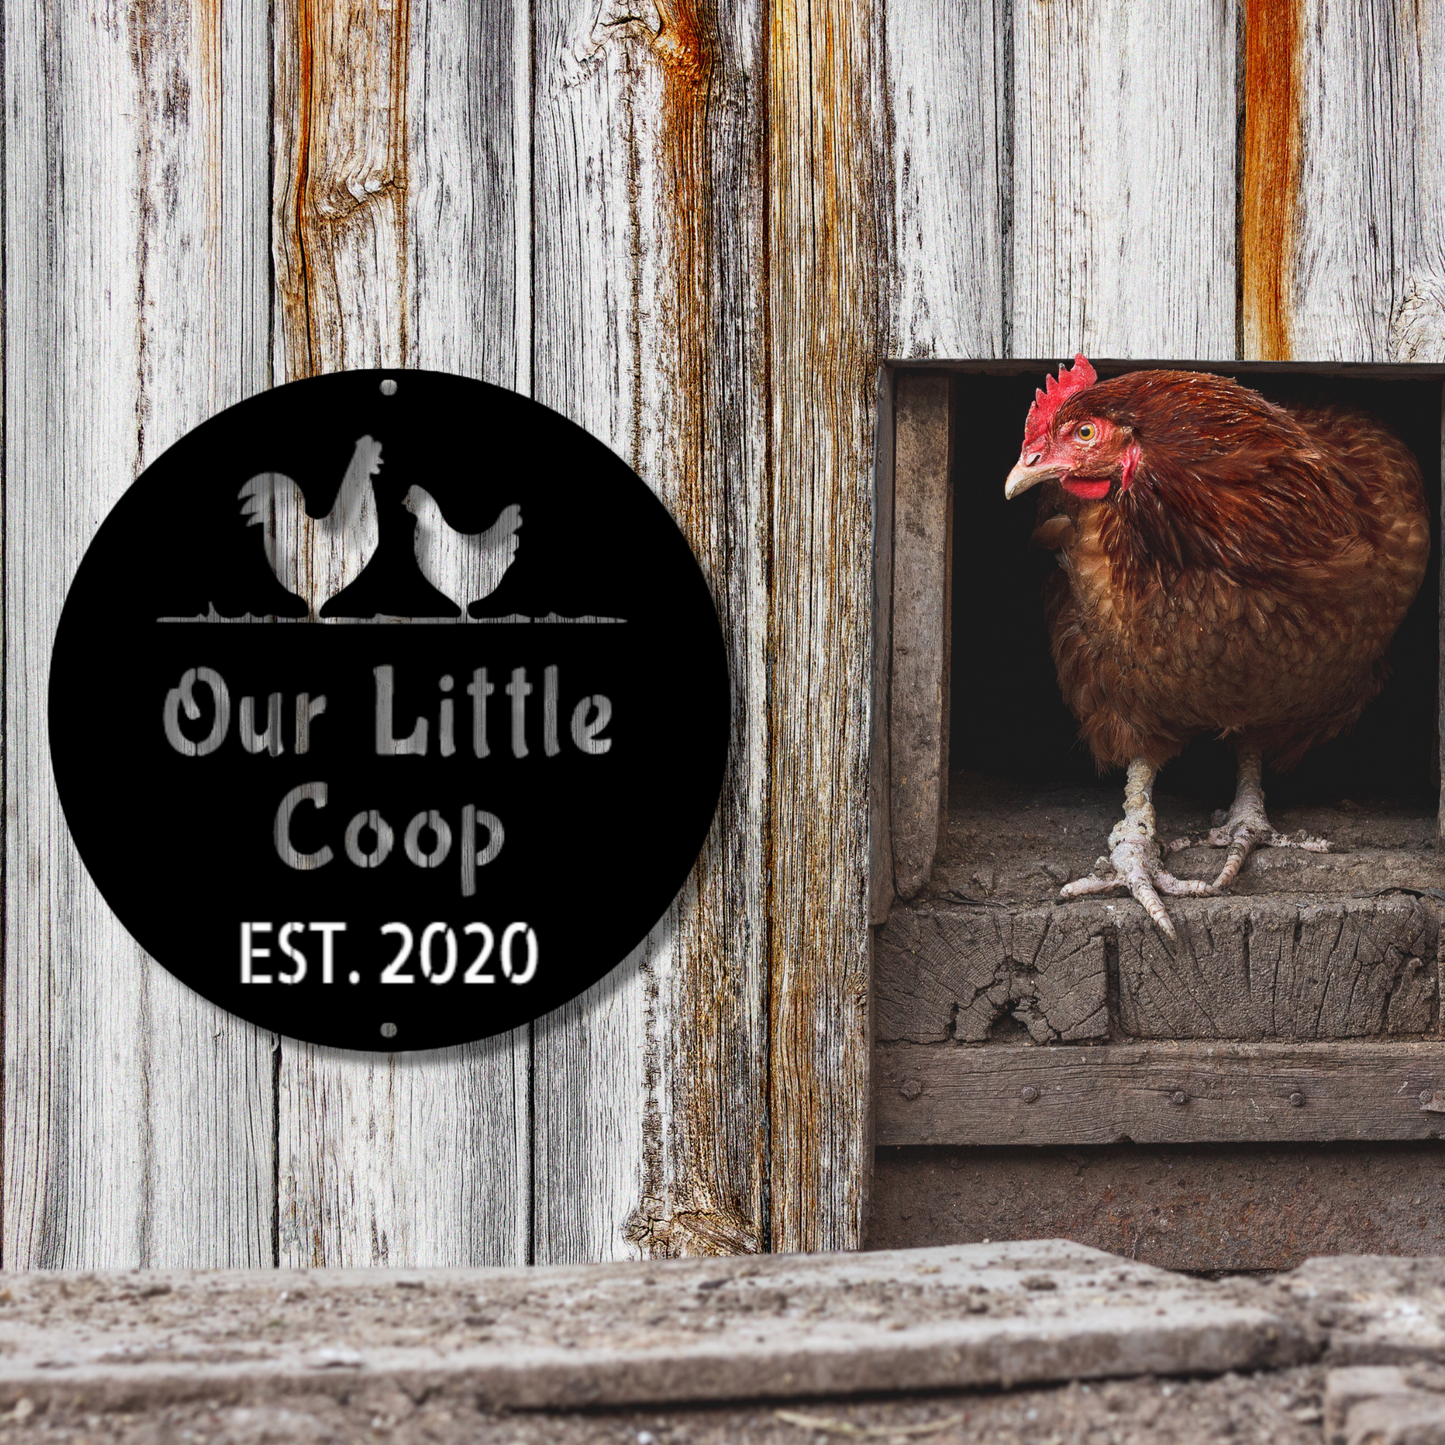 Chicken Coop - Steel Sign, Chicken Lover, Personalized Chicken Gift, Wall Art, Outdoor Signs, Metal Signs, Metal Decorative Sign